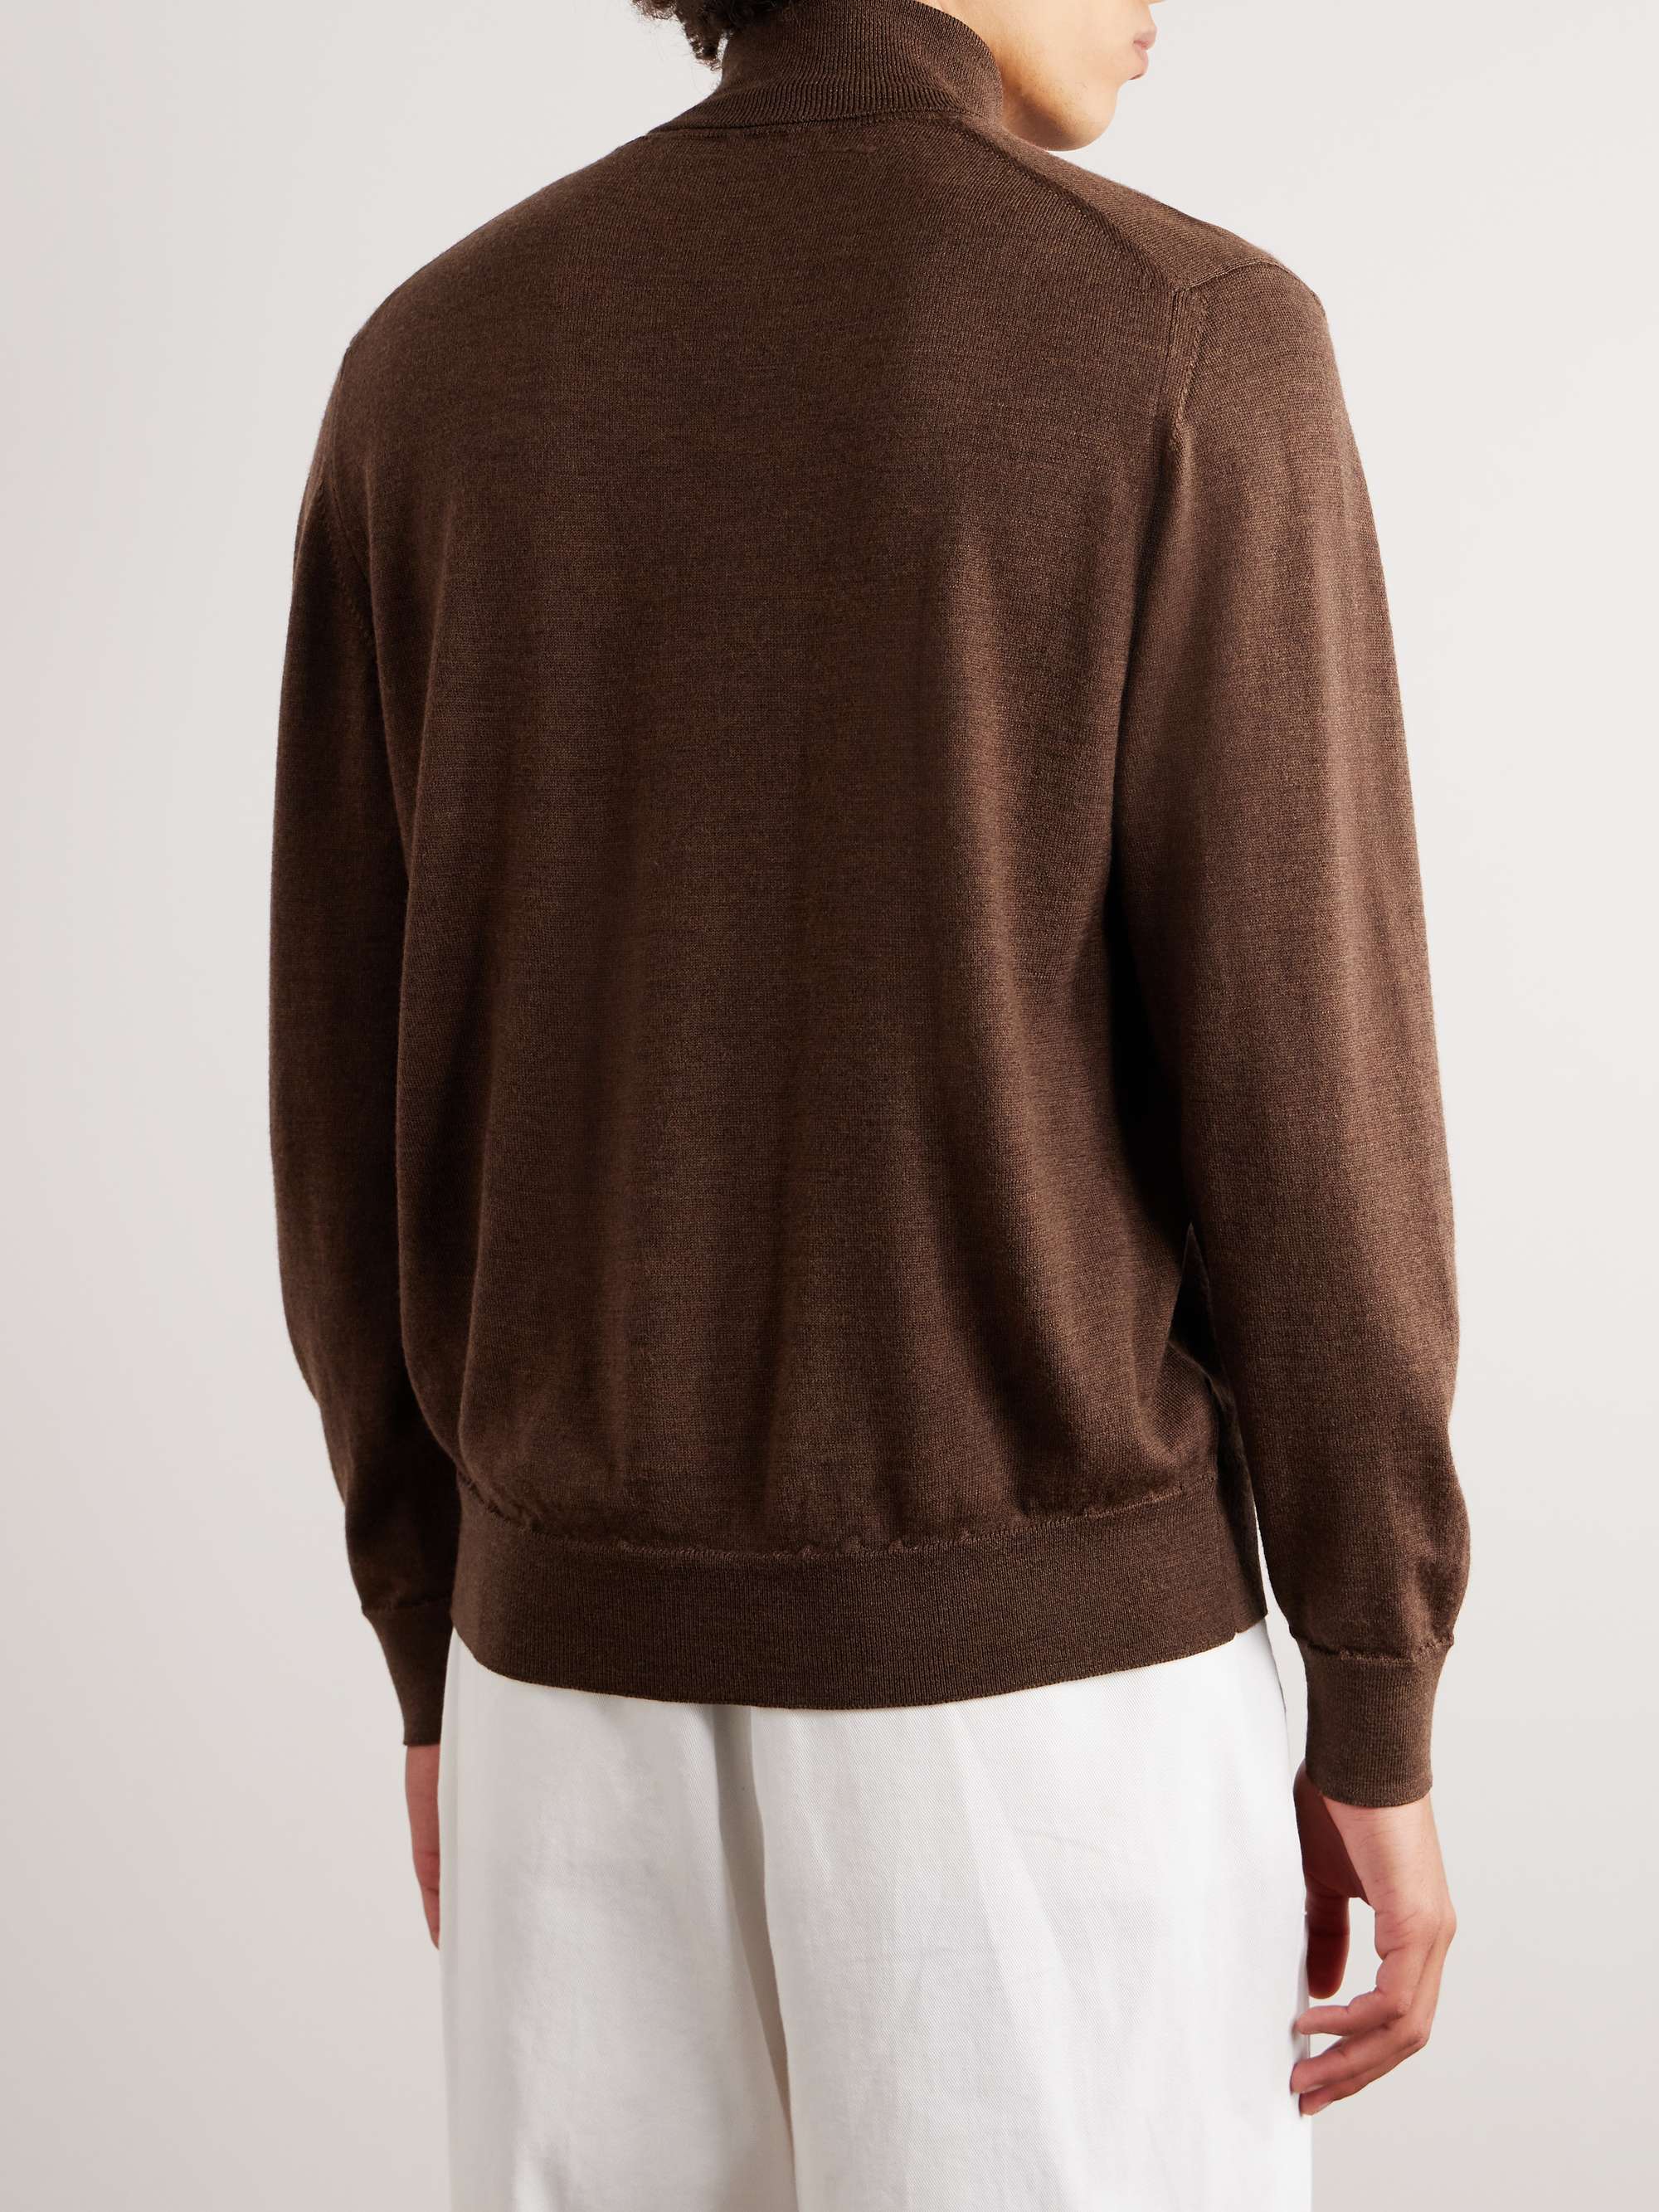 ETRO Logo-Embroidered Wool Rollneck Sweater | MR PORTER